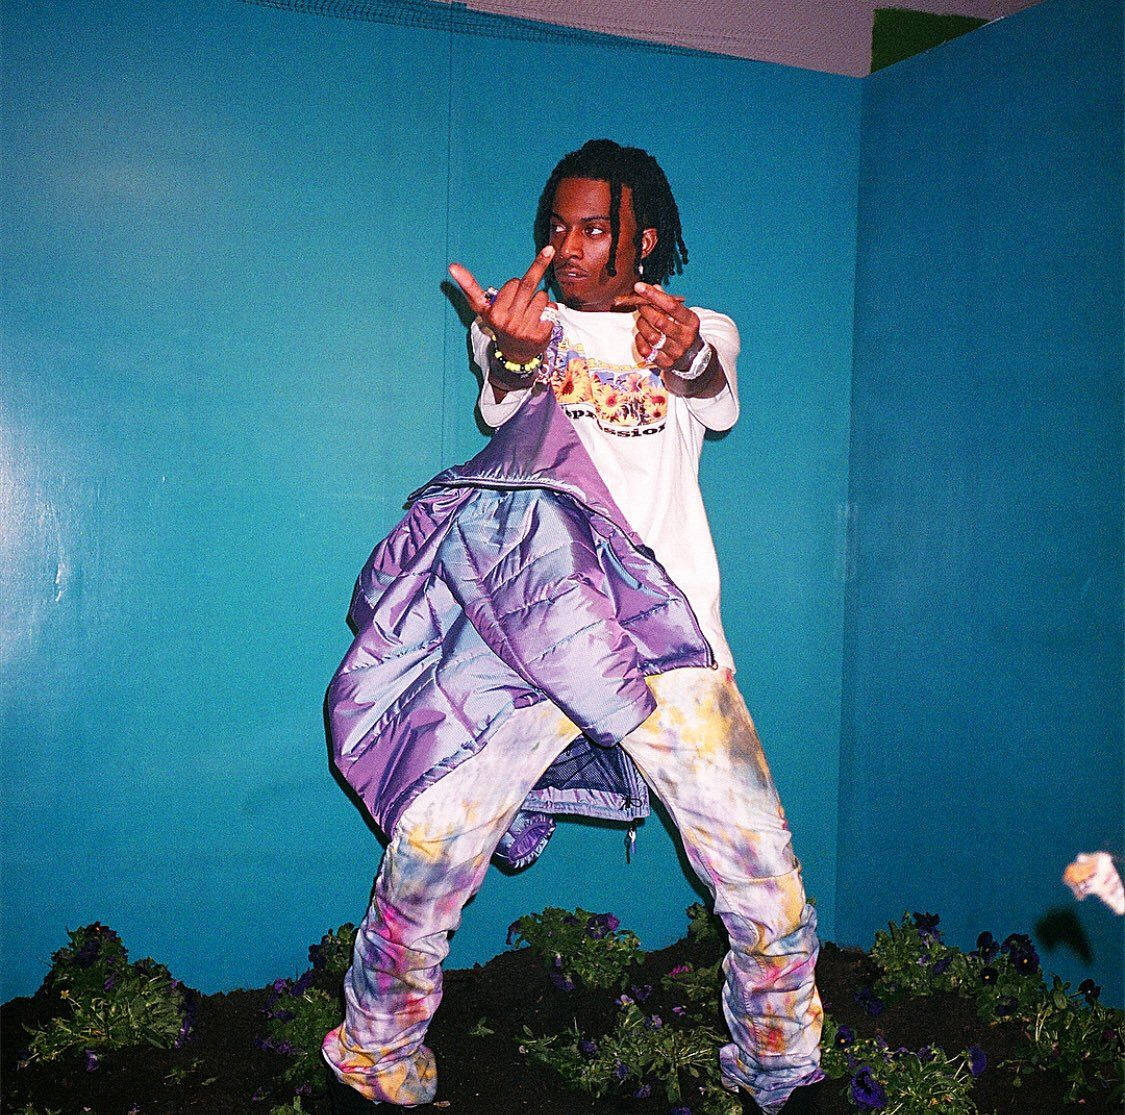 Playboi Carti In Purple Outfit